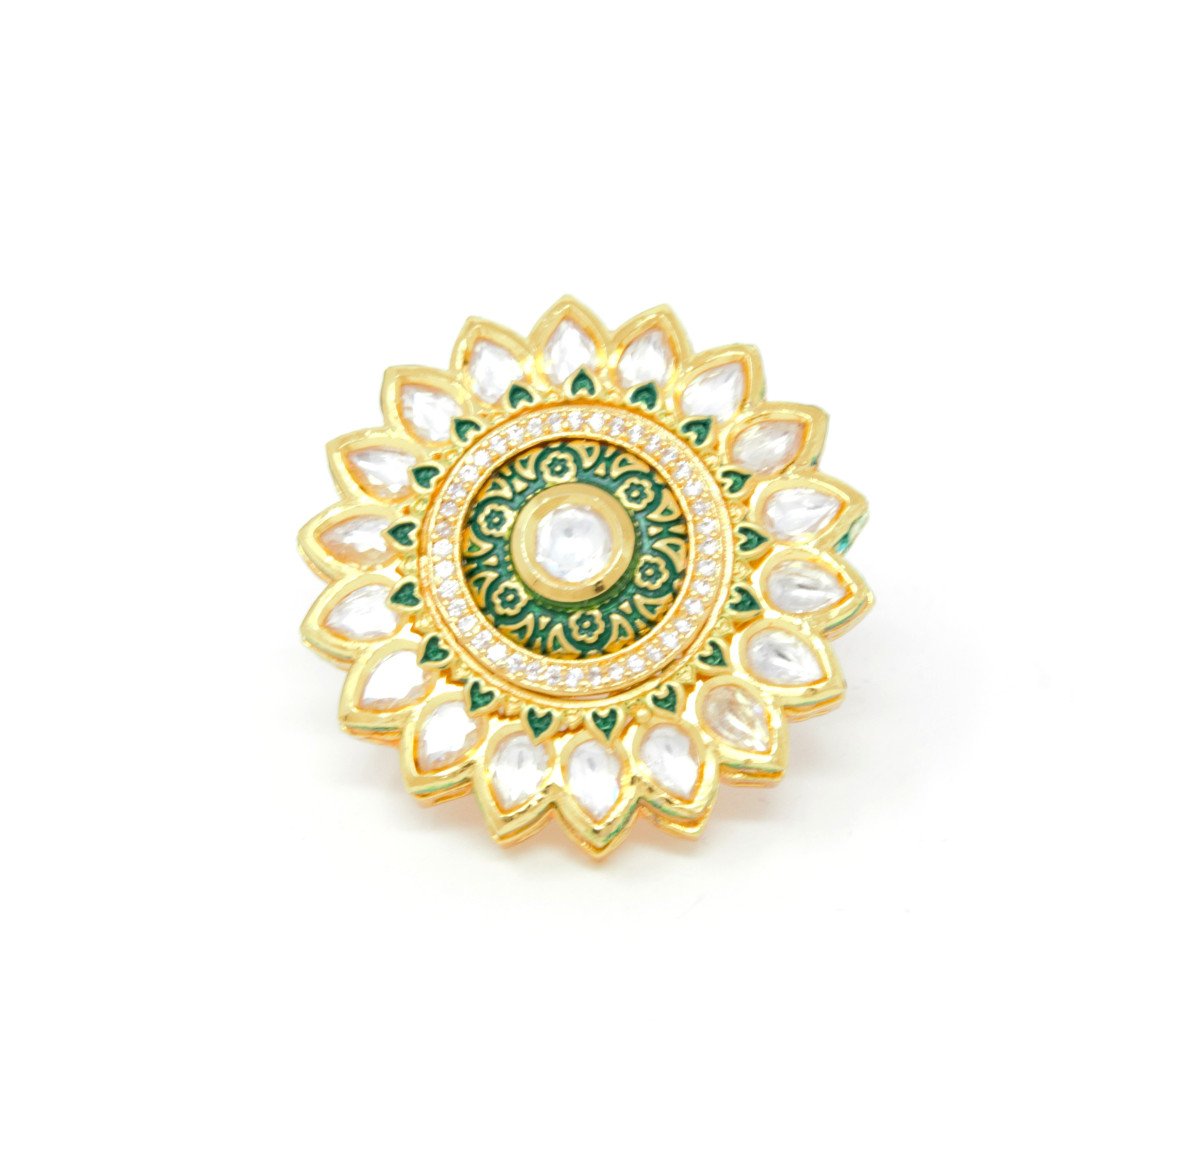 Gold Kundan Ring With Green Carvings around Centered Embedded Kundan and White Stones